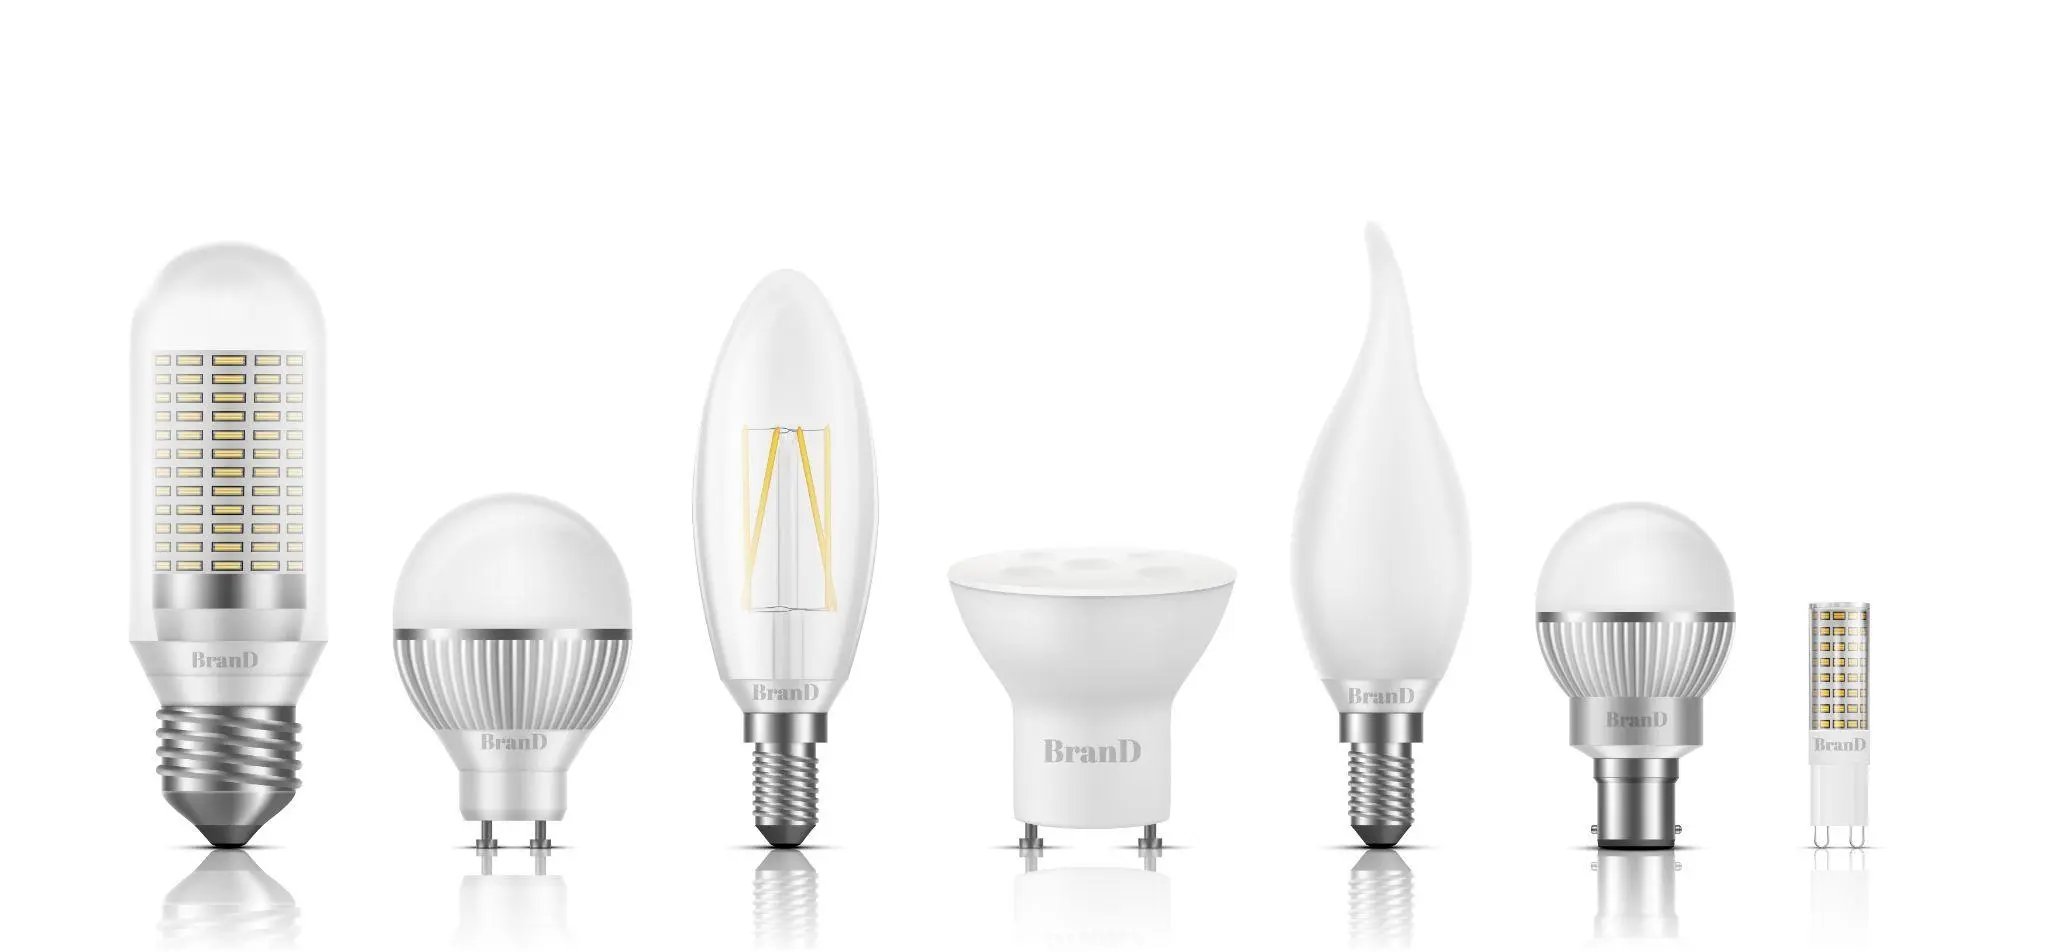 Different shapes, sizes, bases, and filament types led bulbs 3d realistic set isolated on white.